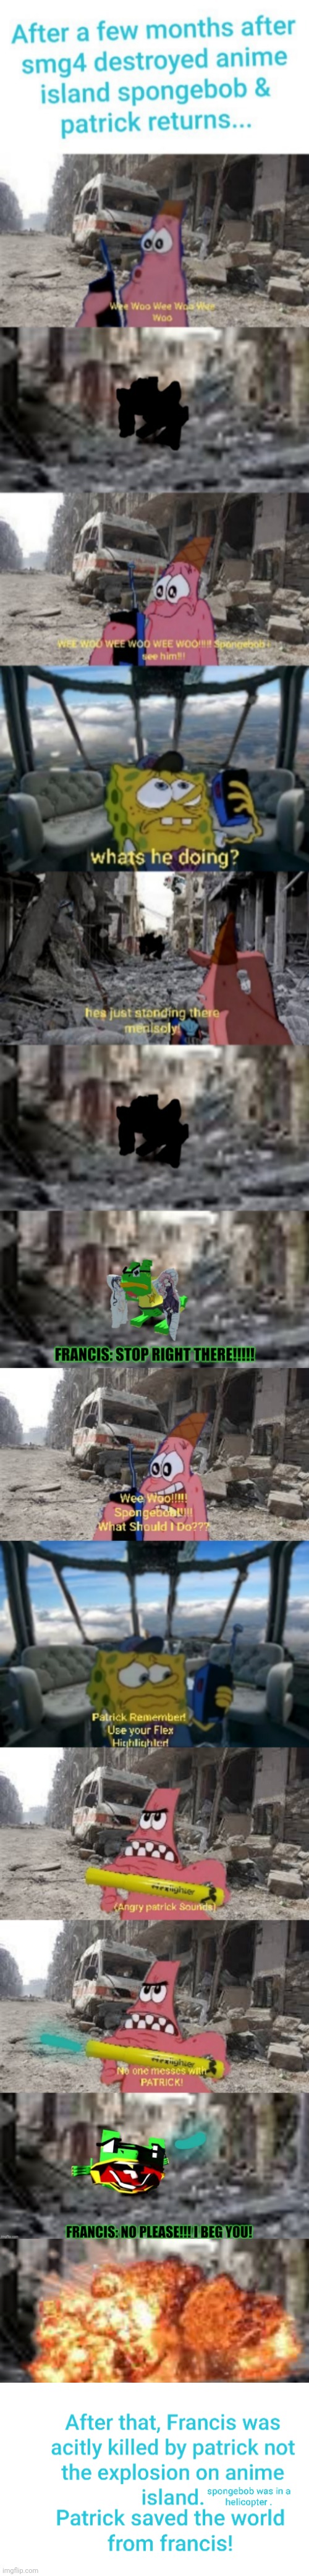 patrick vs francis from smg4 (Fan made) | image tagged in songebob,francis,patrick,animae island,fan made | made w/ Imgflip meme maker